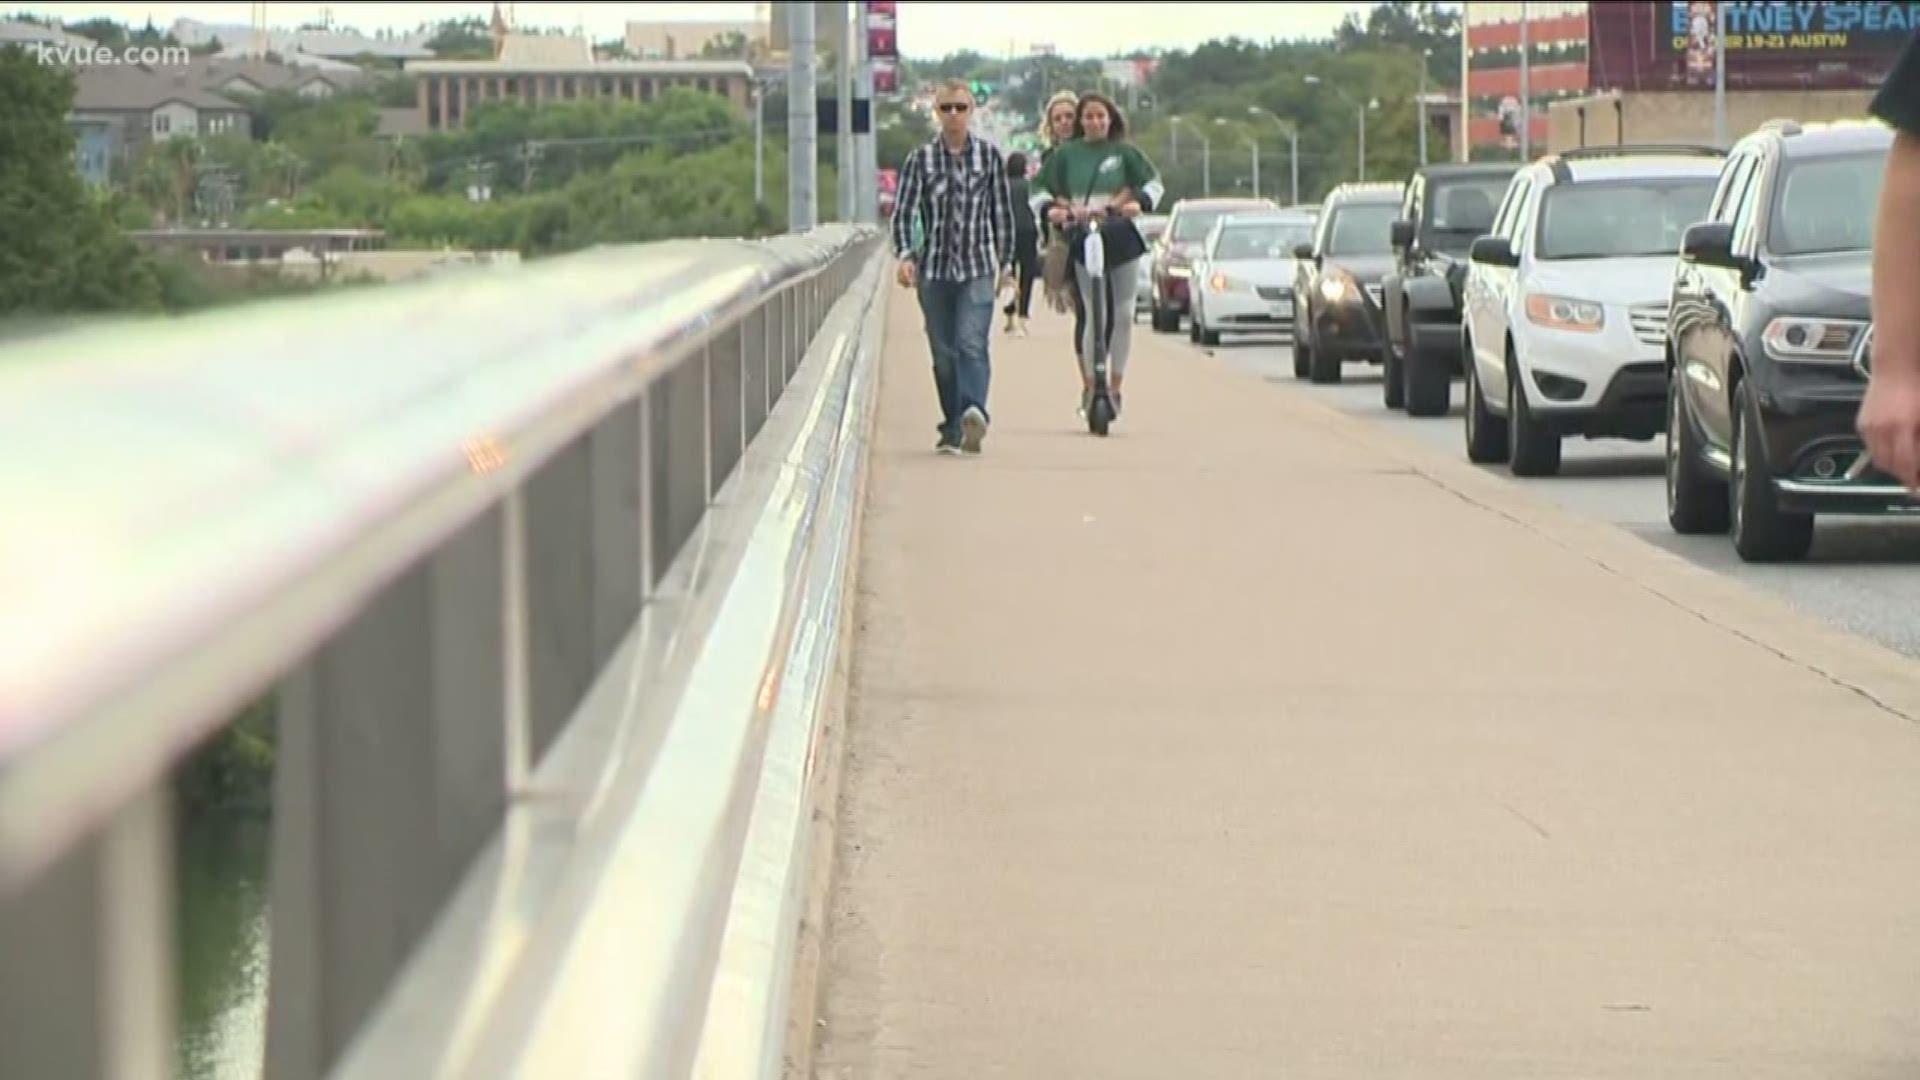 A woman said riders nearly ran her over last weekend while she walked on the Congress Avenue Bridge while they were riding scooters.